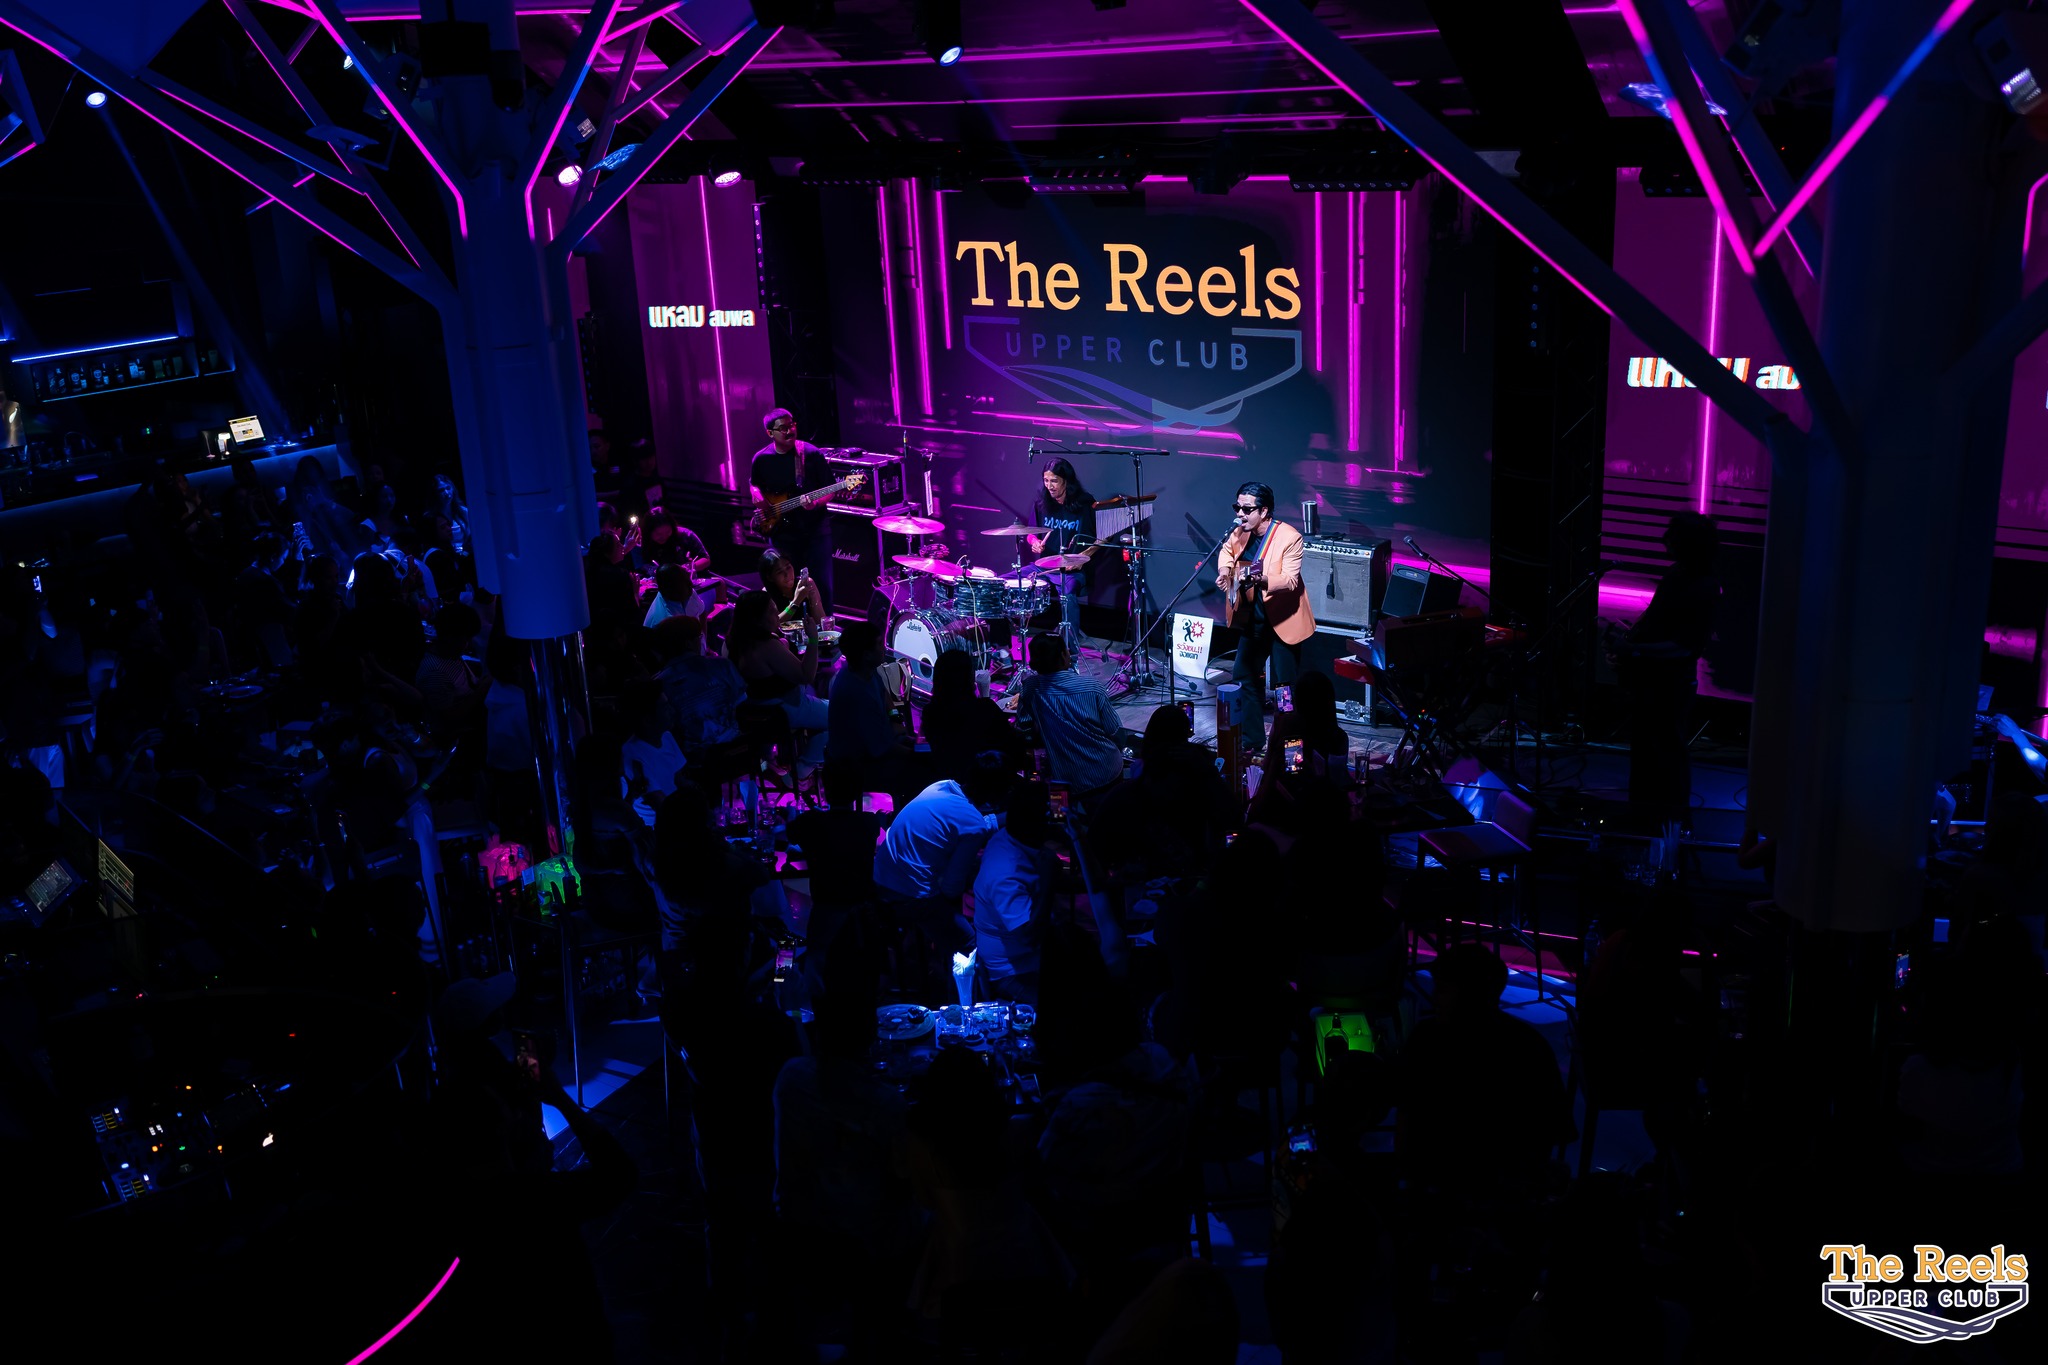 ReelsHall at The Reels Upper Club (ReelsHall at The Reels Upper Club) : นนทบุรี (Nonthaburi)